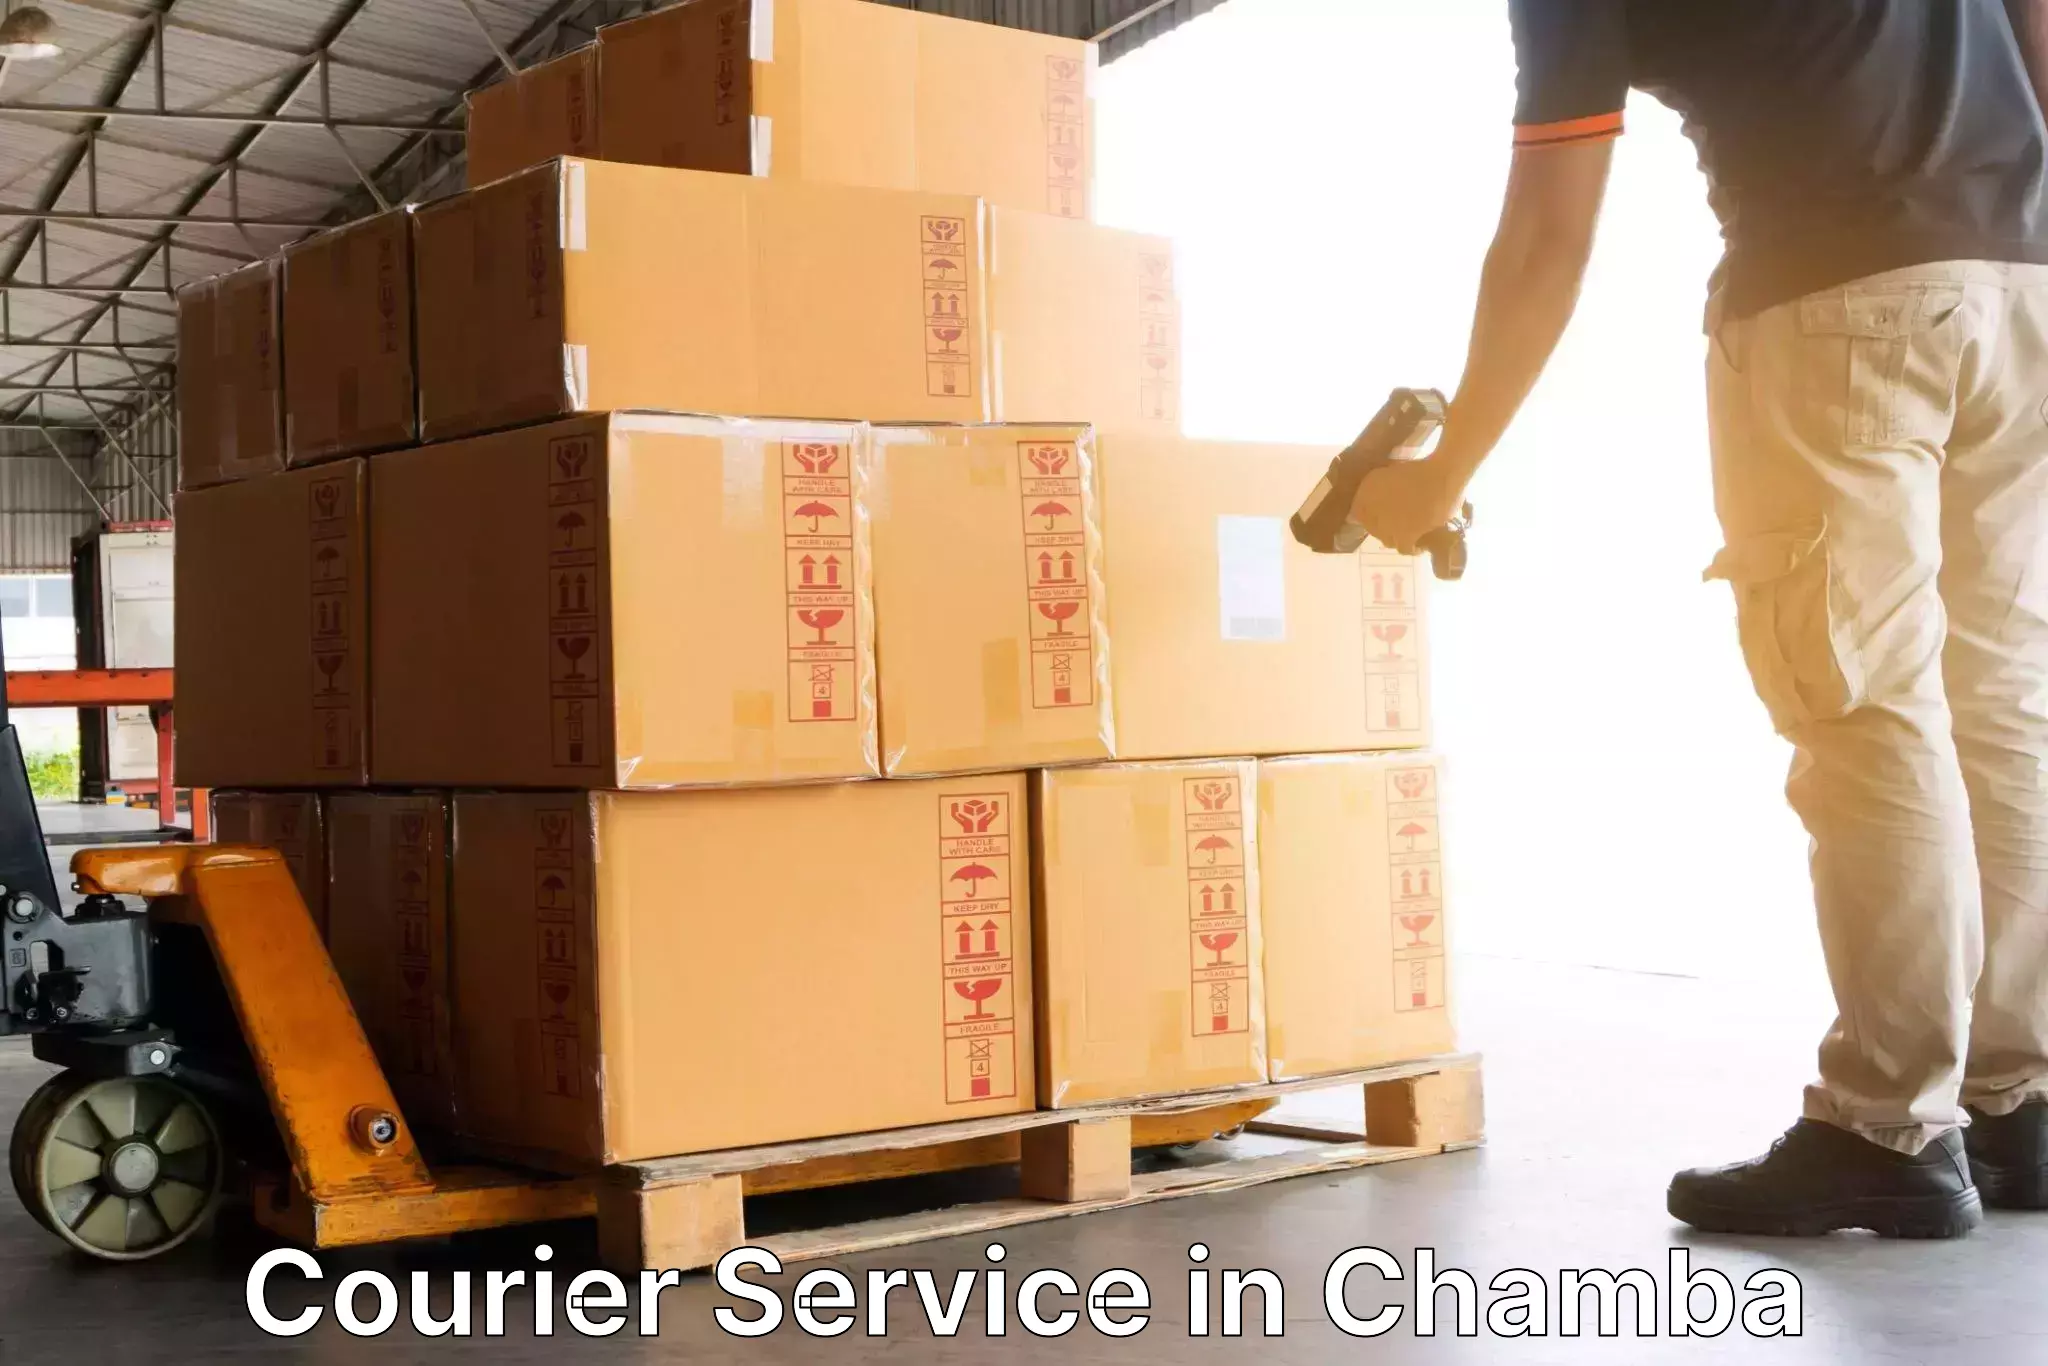 Expedited parcel delivery in Chamba